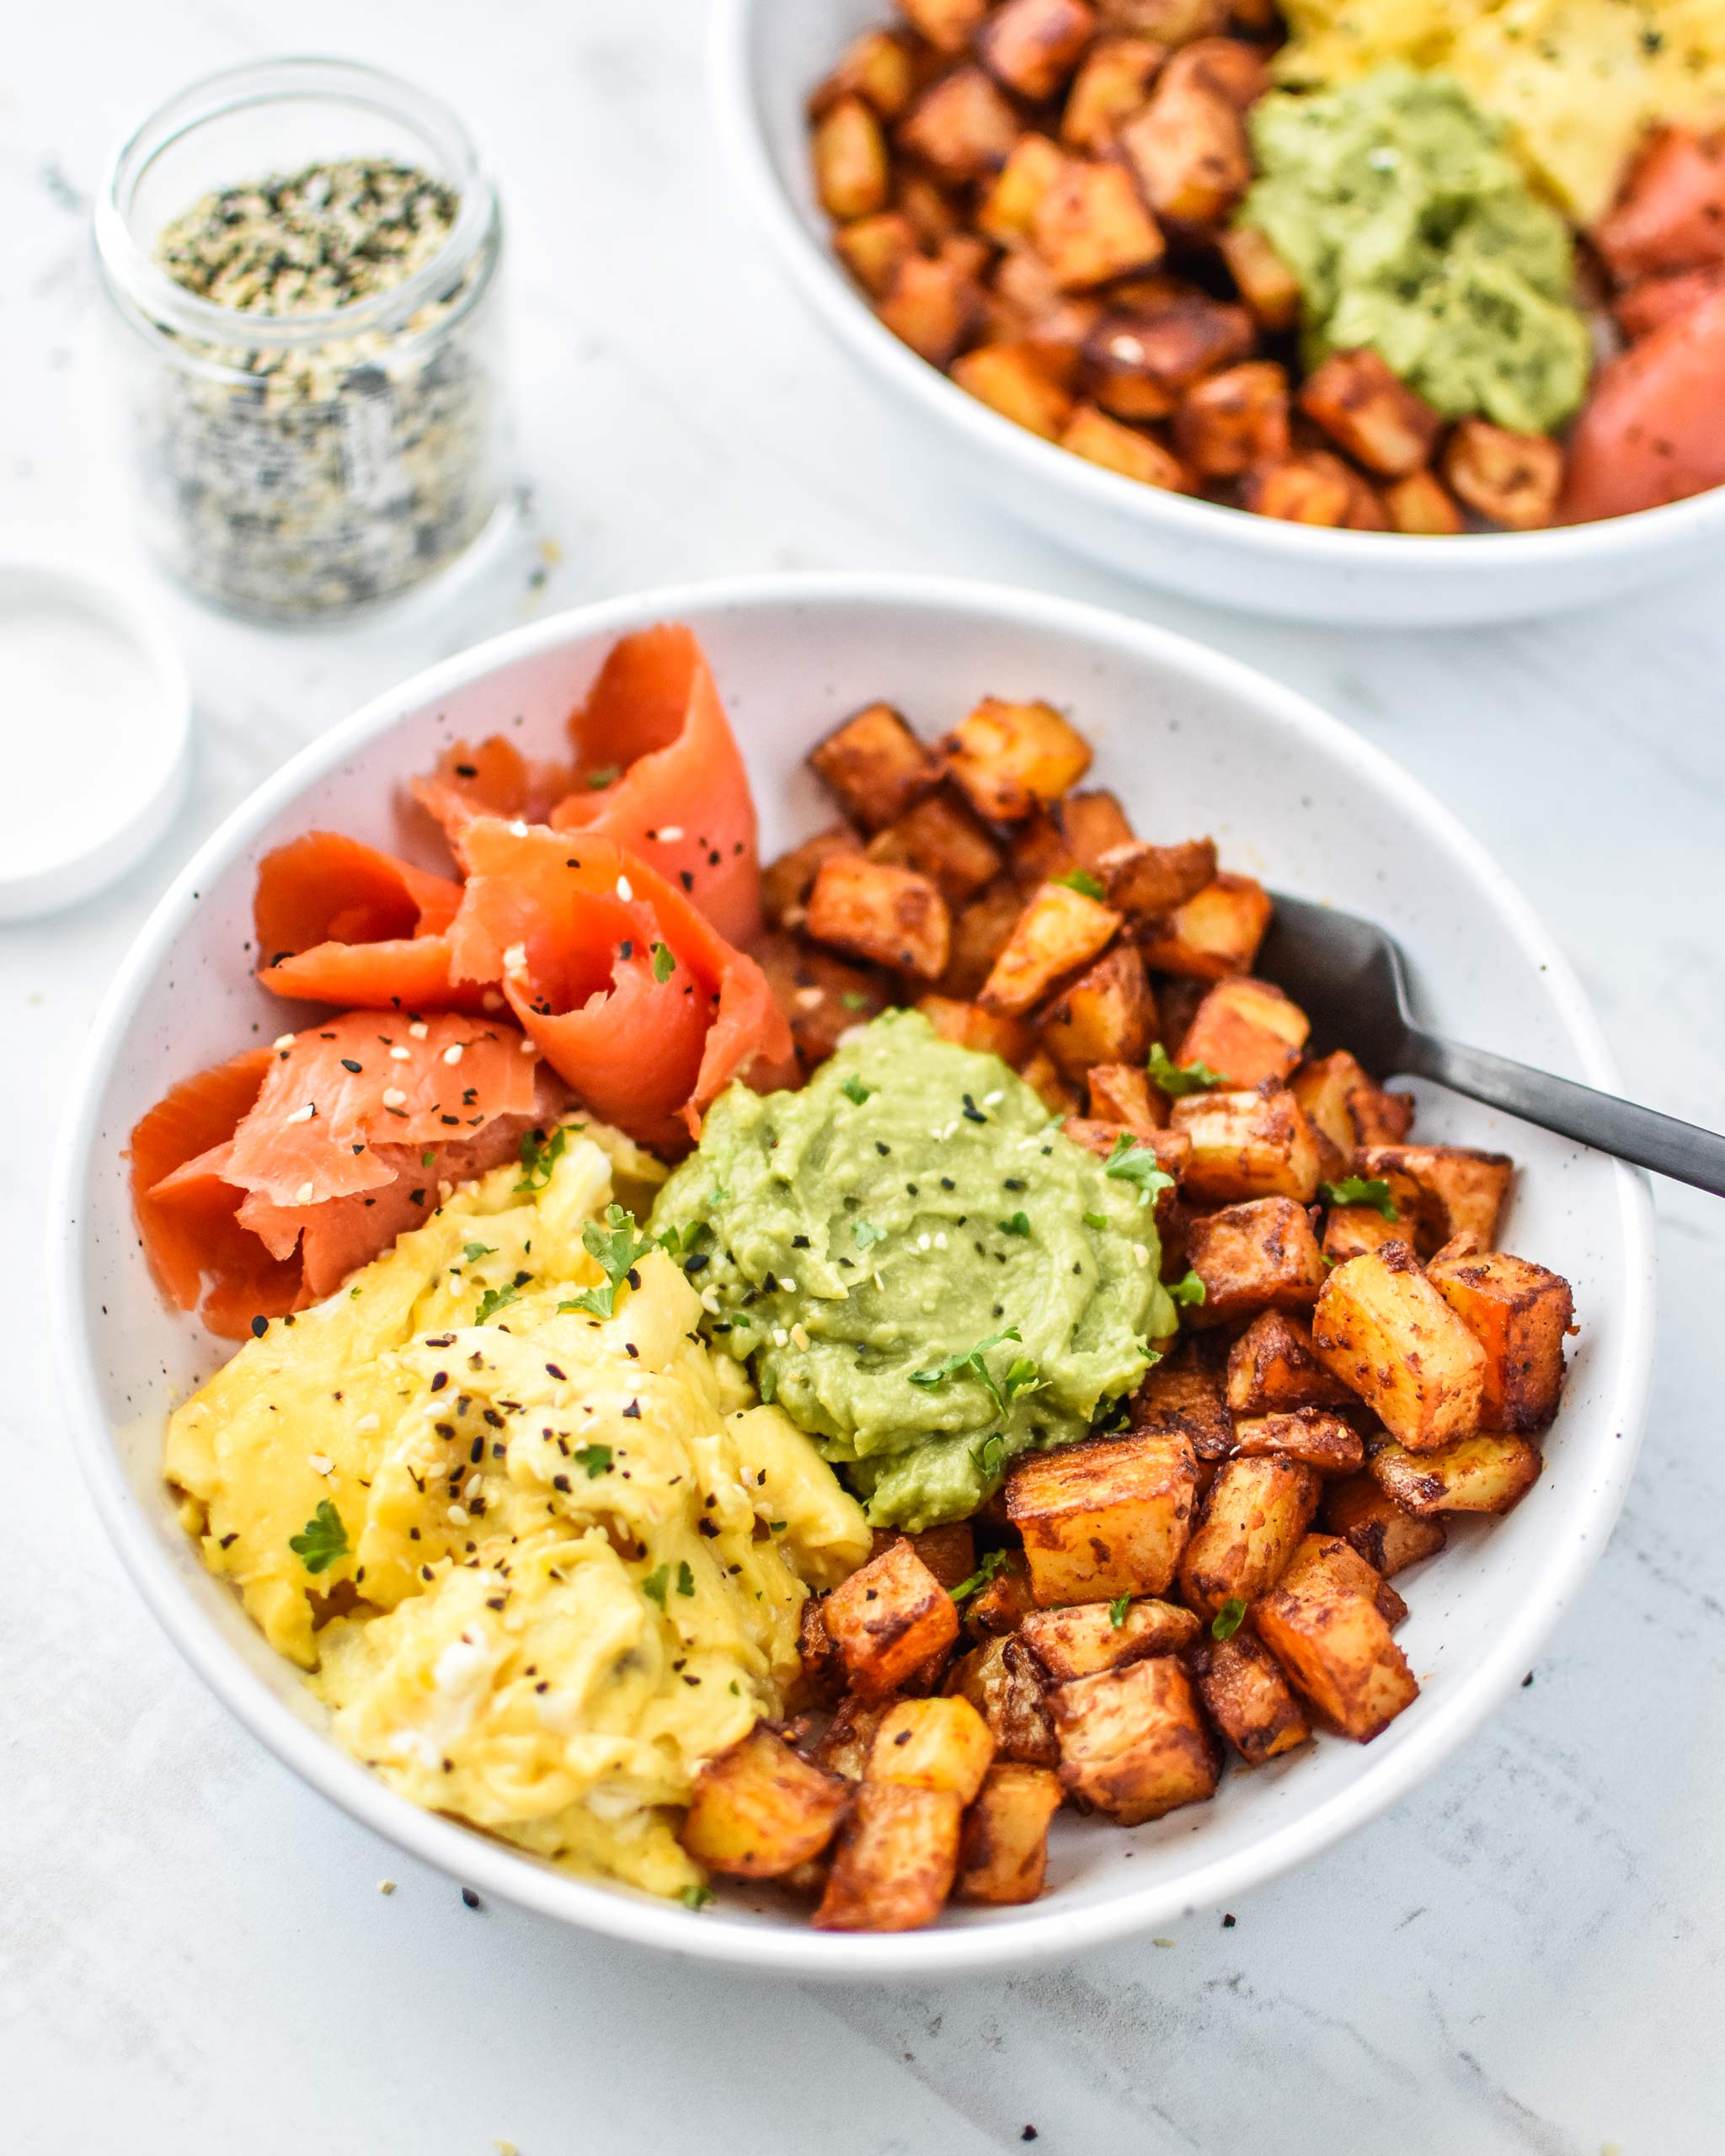 breakfast for dinner is always an option! especially if you don't get to breakfast like this at breakfast time this is the best whole30 dinner recipe idea